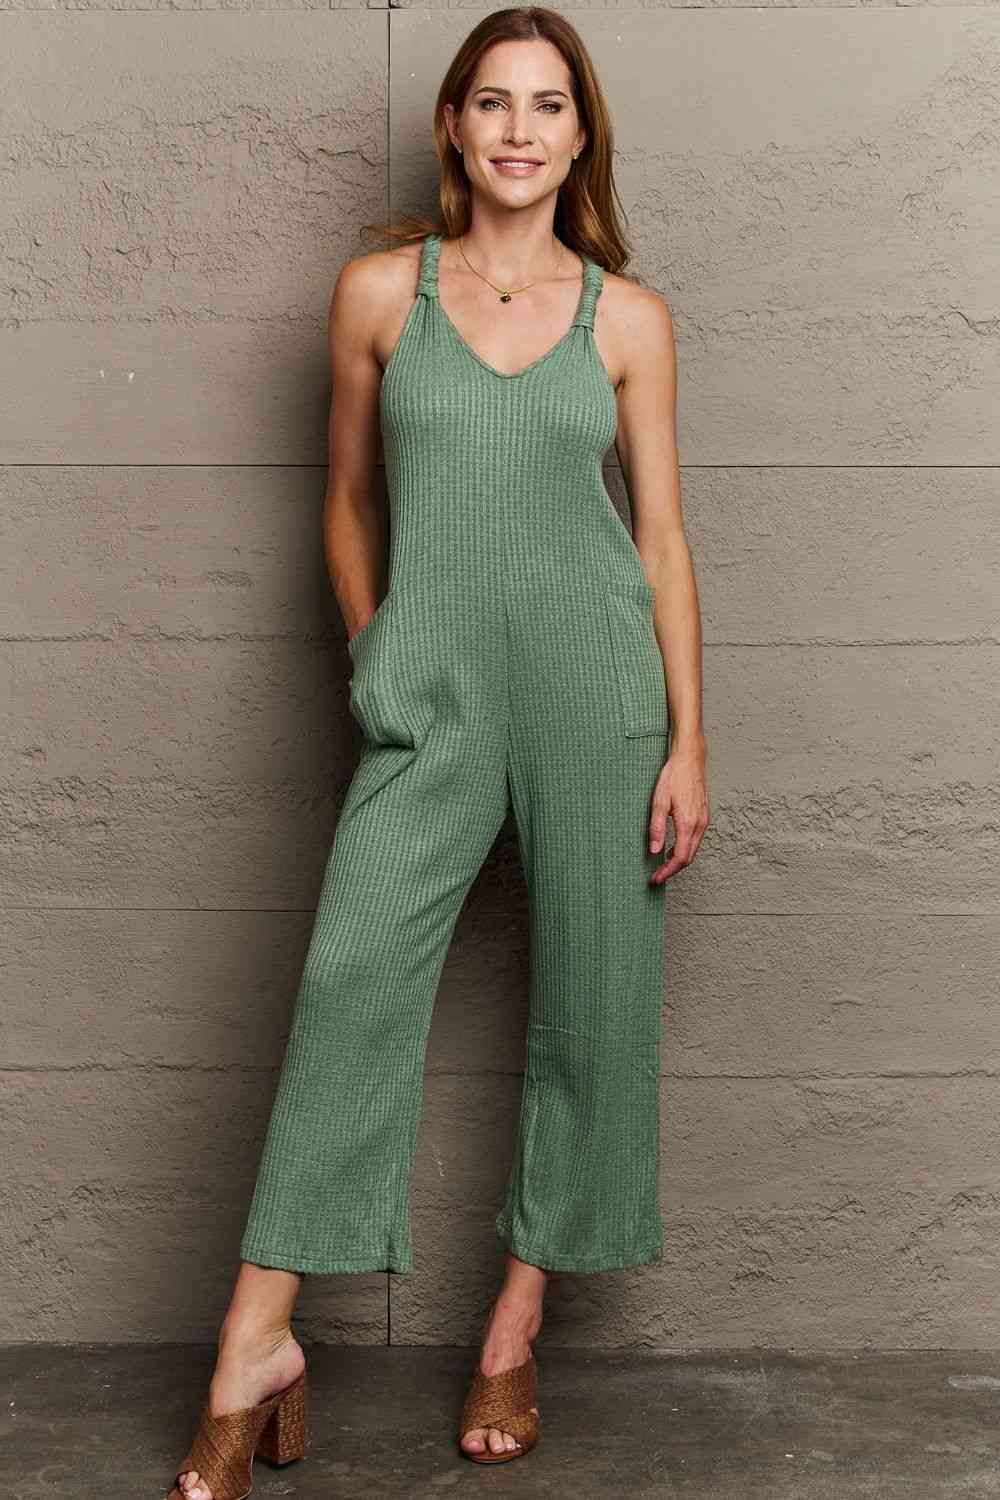 HEYSON Don't Get It Twisted Full Size Rib Knit Jumpsuit - PEONIES & LIME